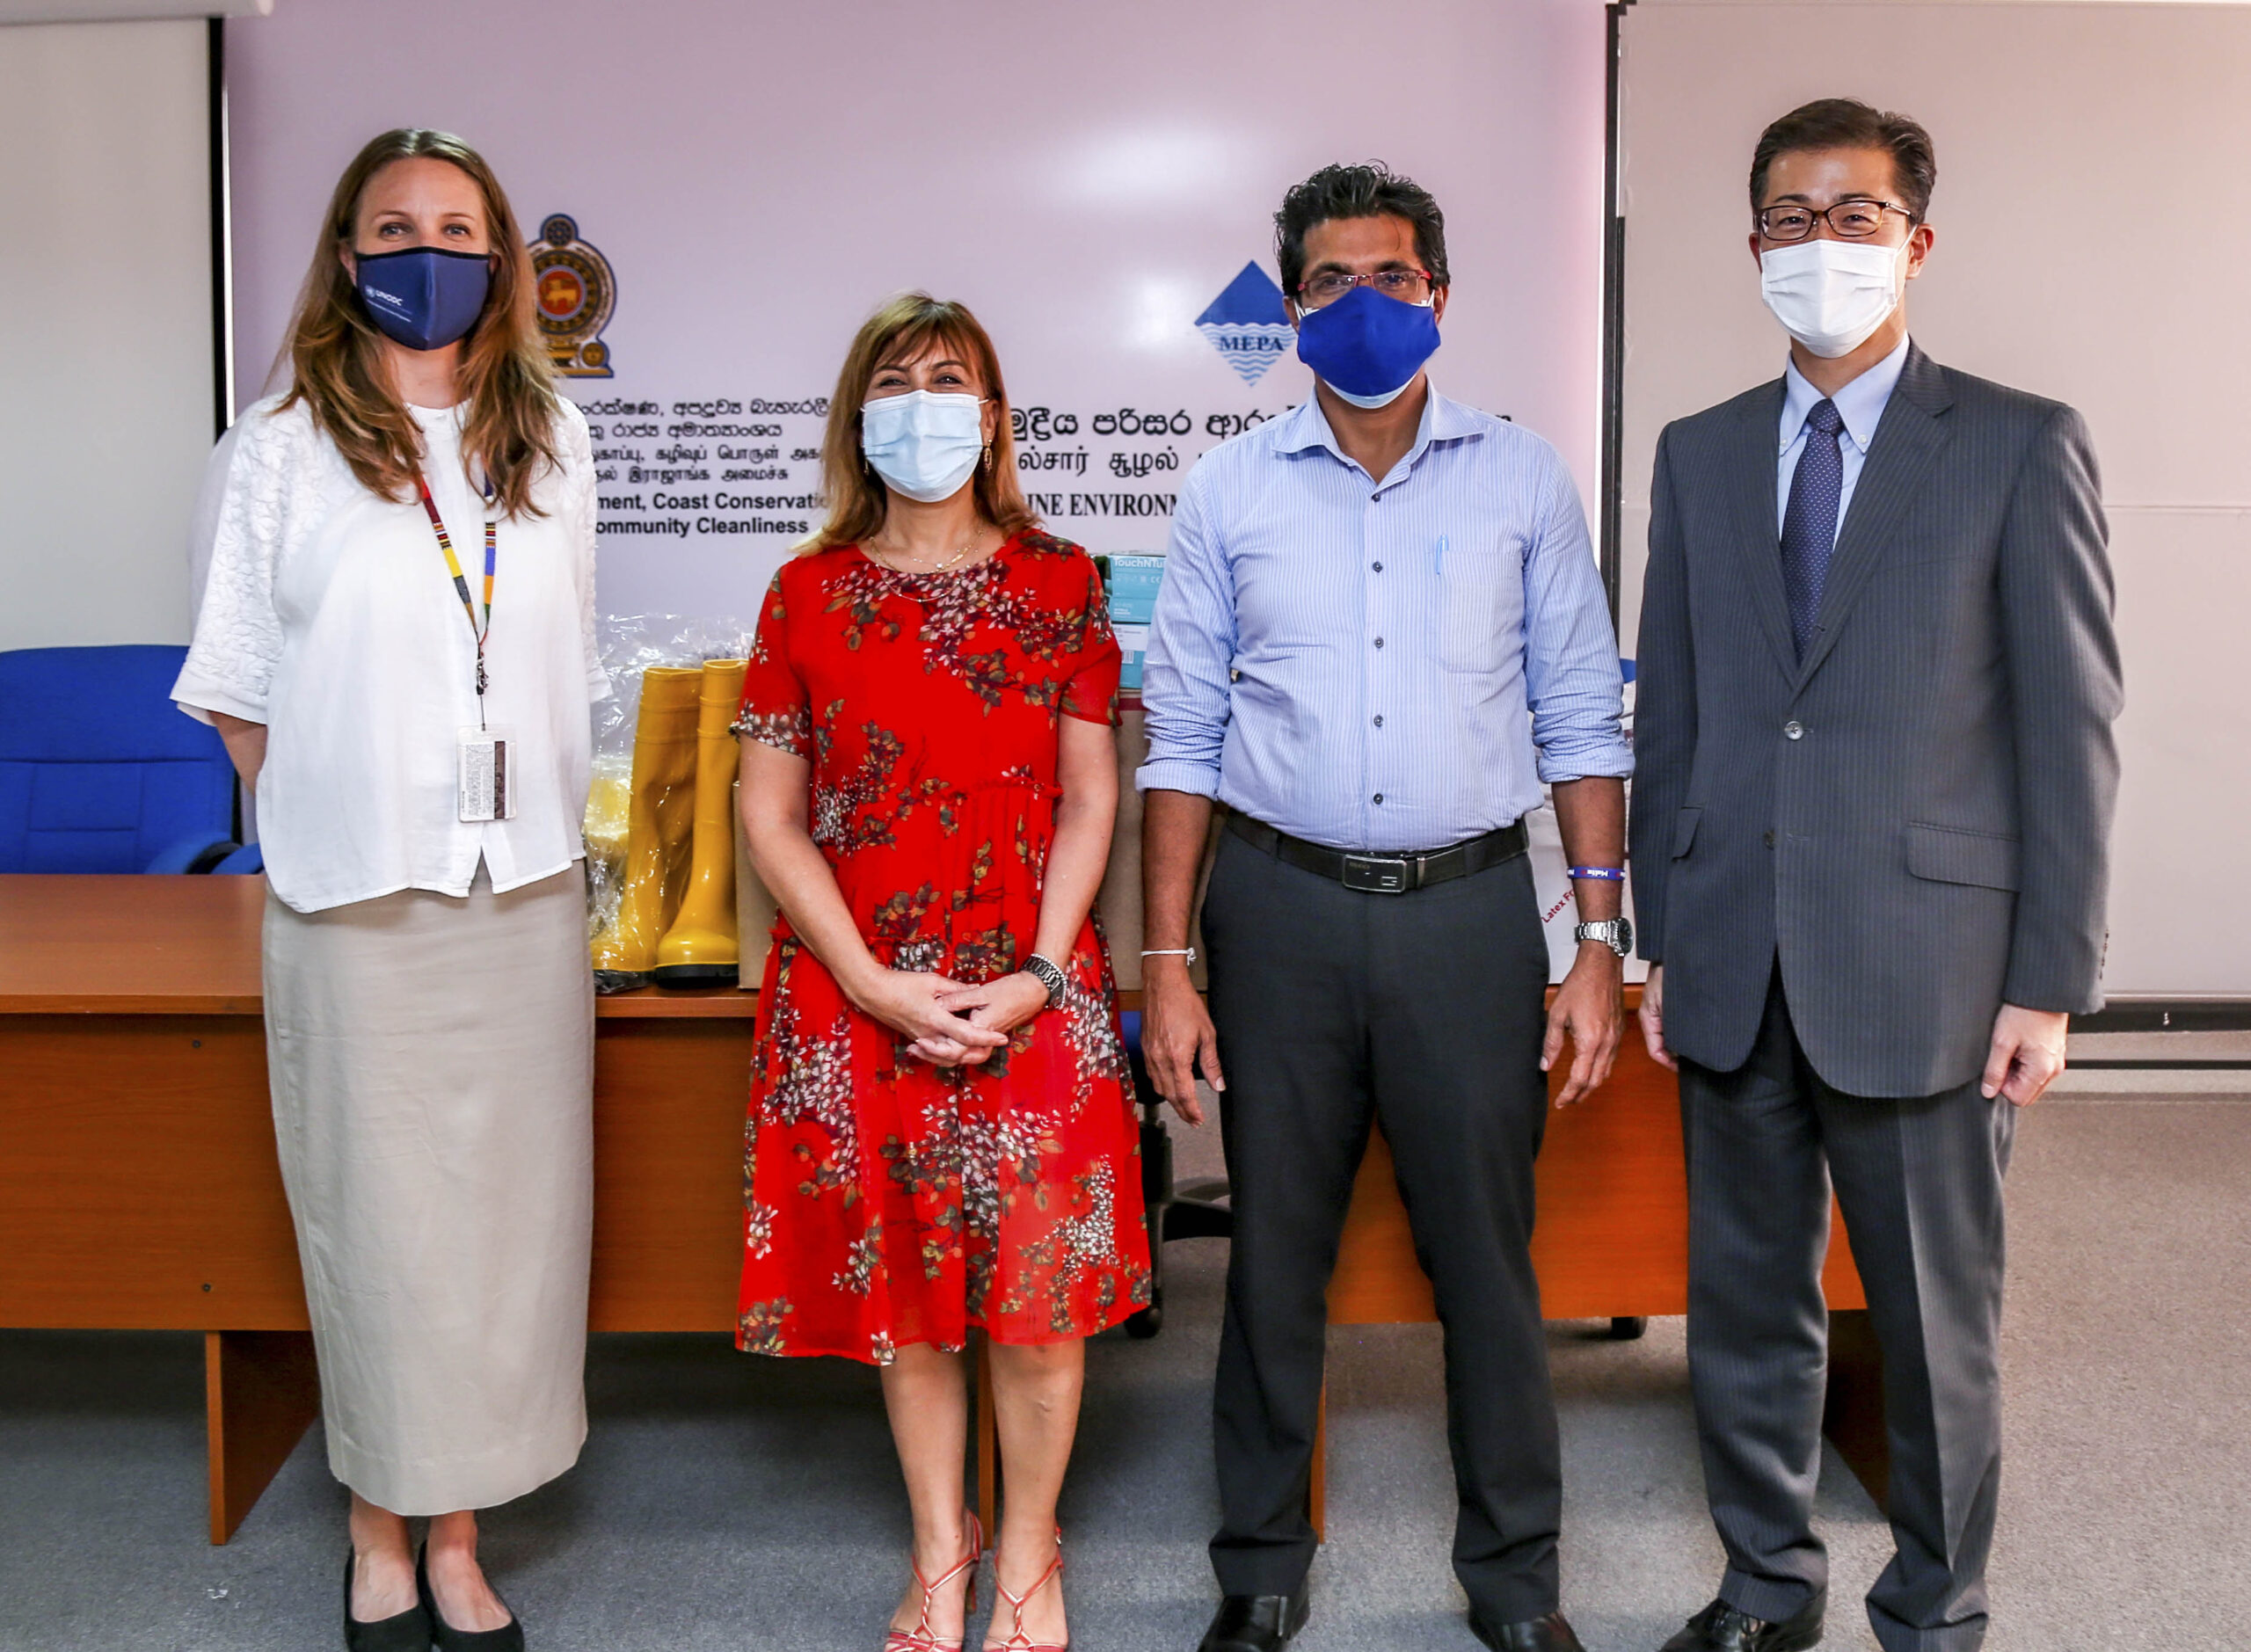 United Nations in Sri Lanka and the Japanese Embassy support towards the Government’s immediate response to the MV X-Press Pearl wreck off the coast of Sri Lanka. Donate PPE to MEPA